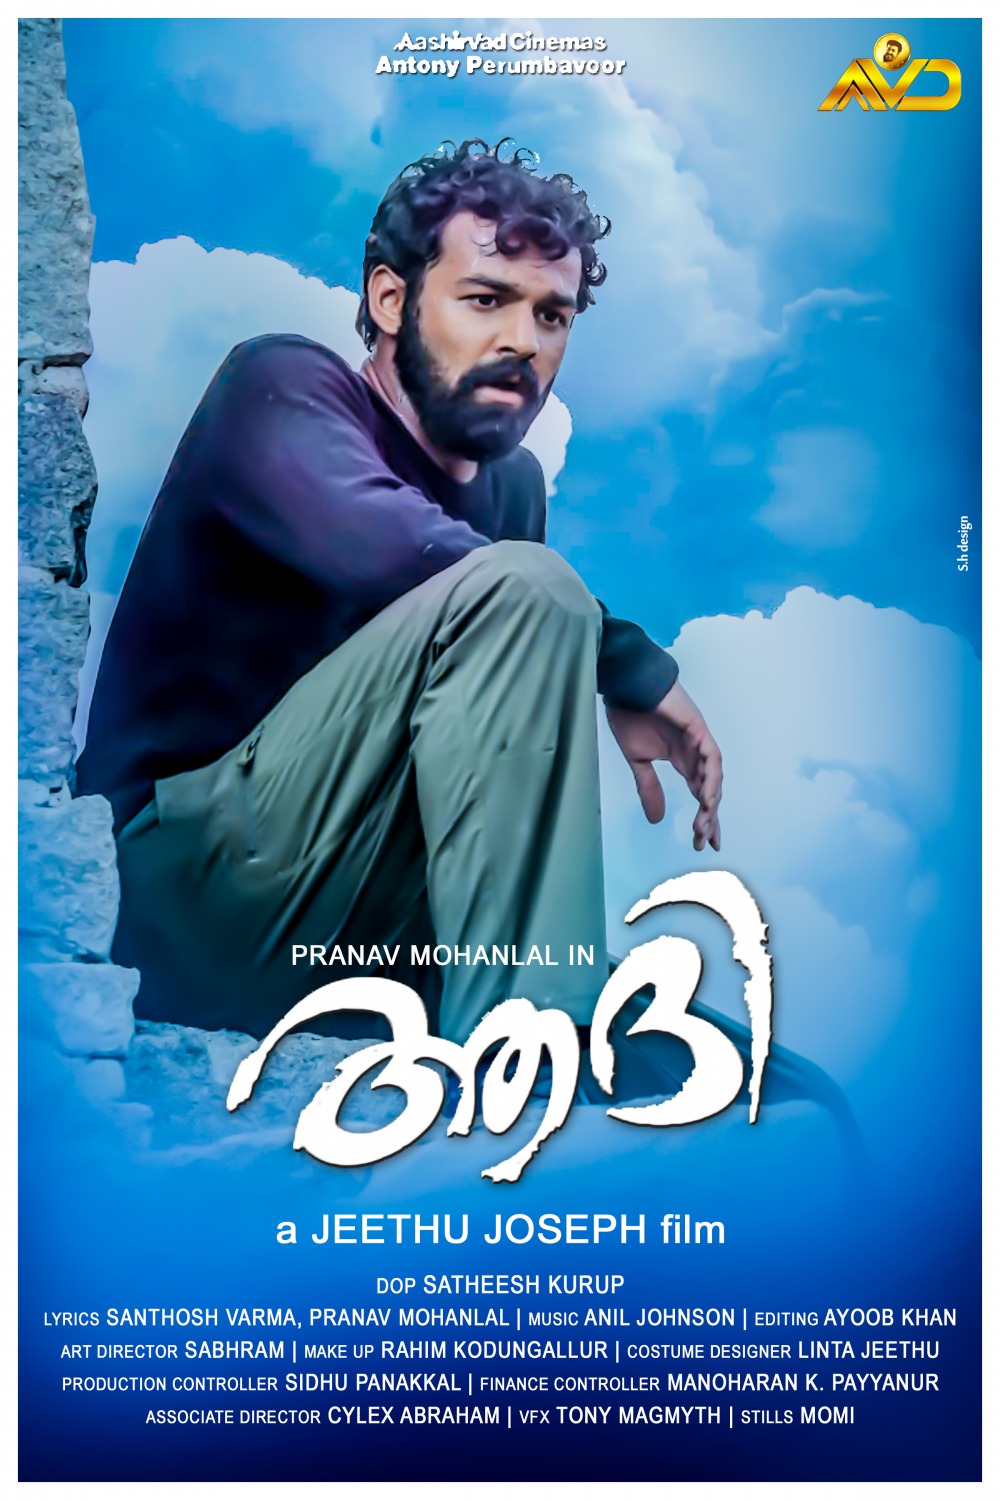 Extra Large Movie Poster Image for Aadhi 